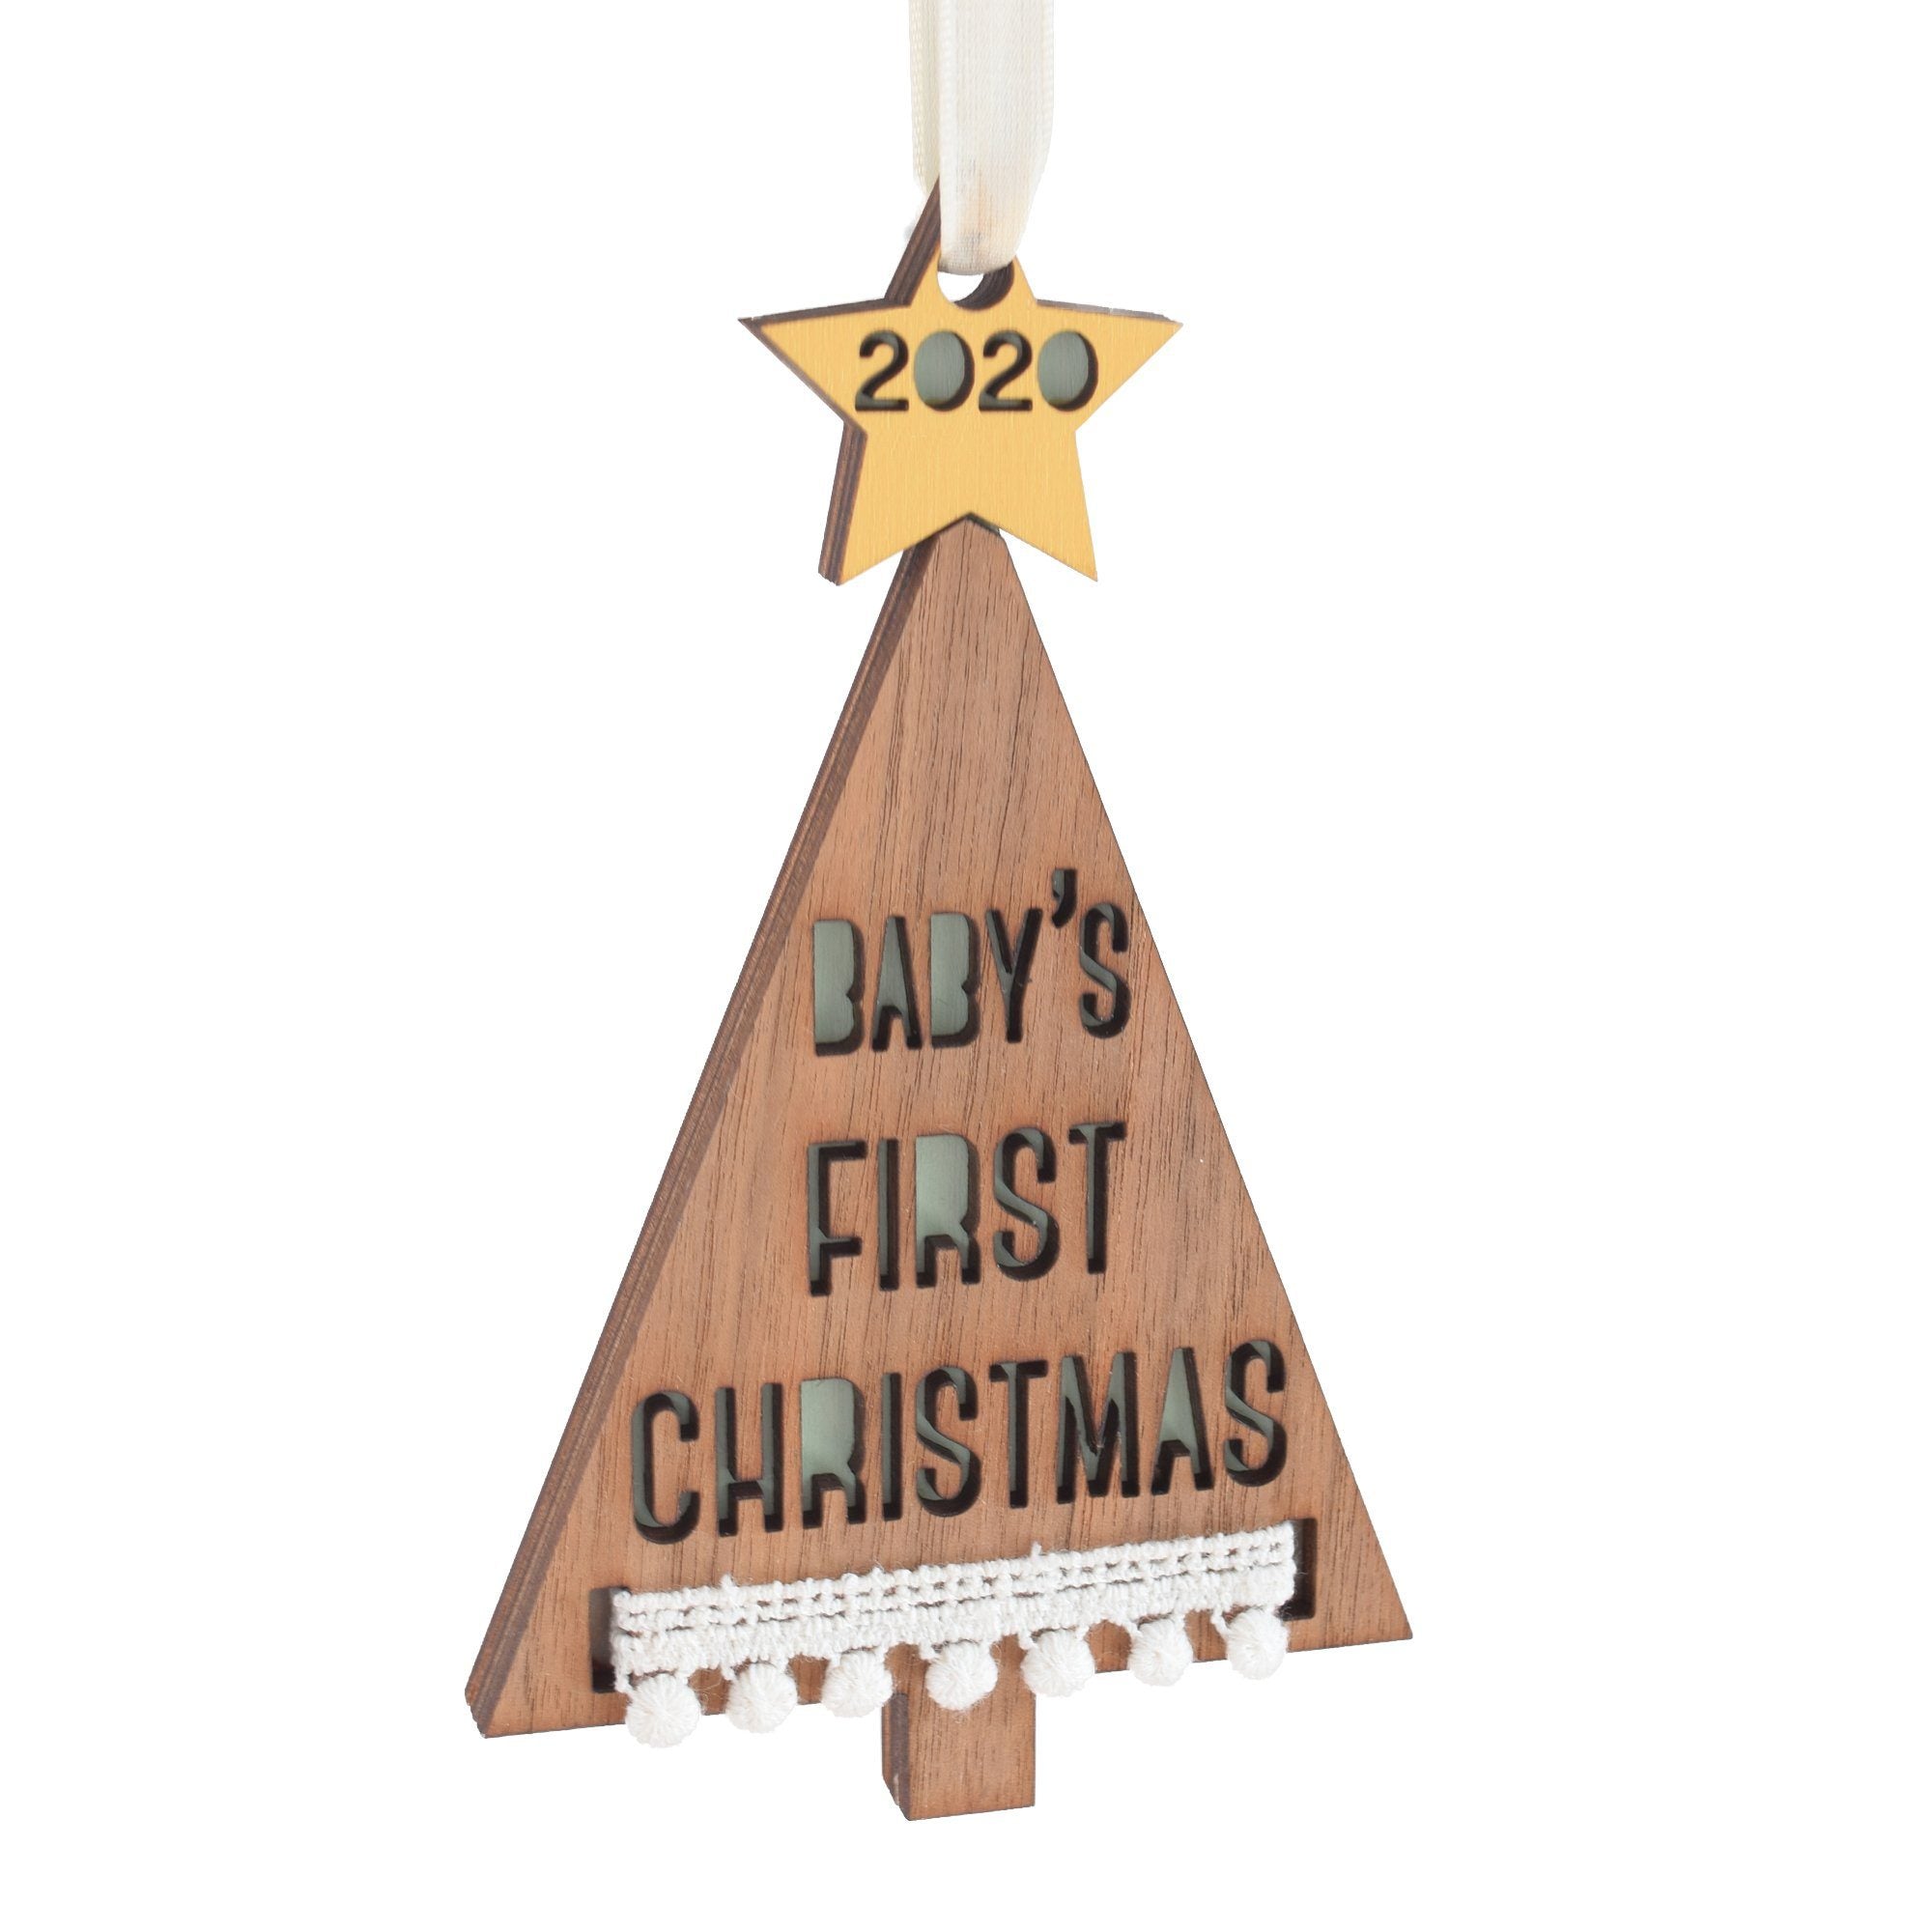 Personalized Baby?s First Christmas Tree Ornament